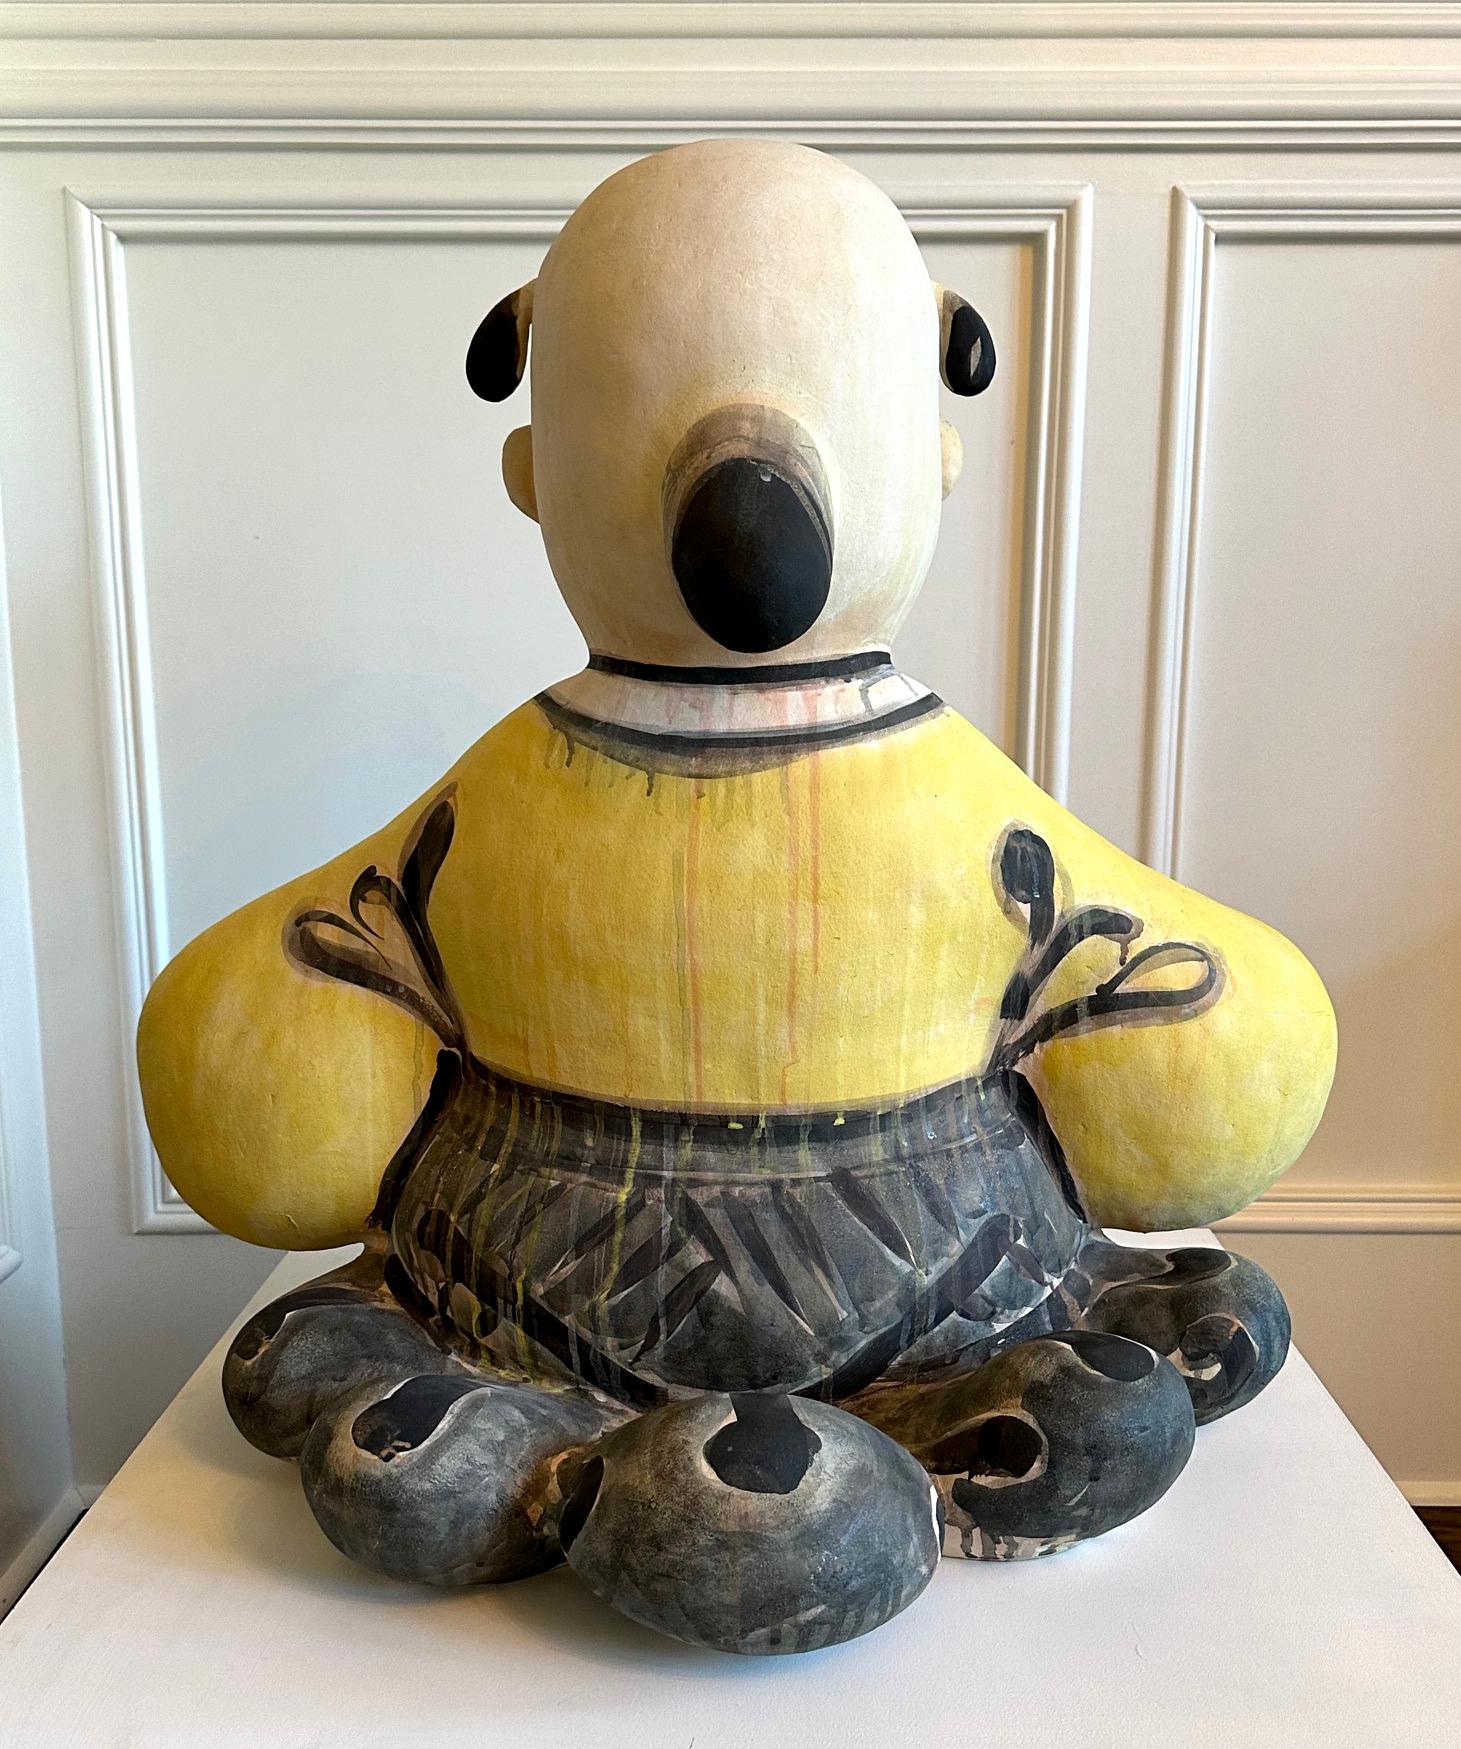 Important Ceramic Sculpture Karako by Akio Takamori Exhibited and Published In Good Condition For Sale In Atlanta, GA